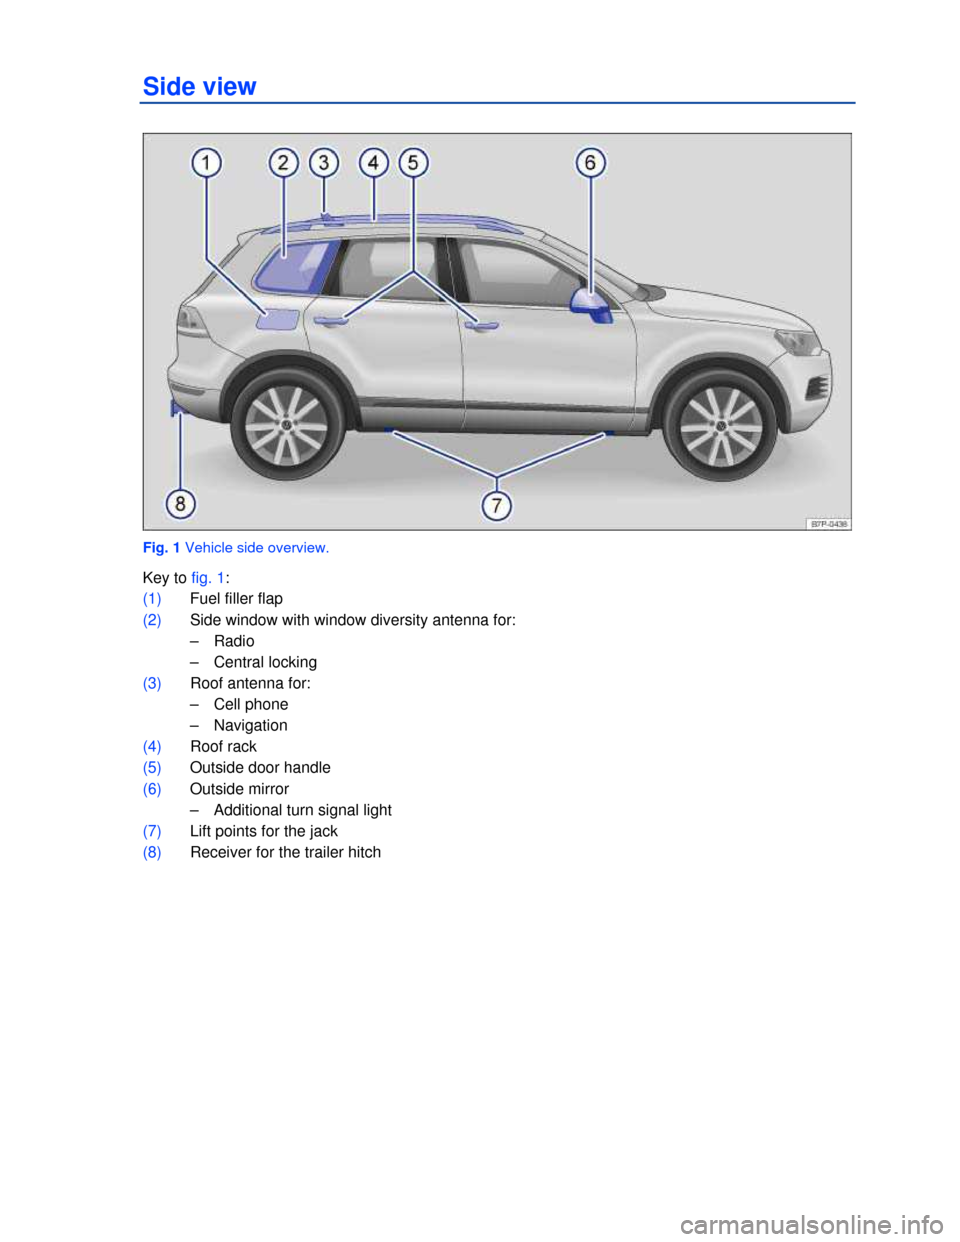 VOLKSWAGEN TOUAREG 2013 2.G Owners Manual  
Side view 
 
Fig. 1 Vehicle side overview. 
Key to fig. 1: 
(1) Fuel filler flap  
(2) Side window with window diversity antenna for:  
–  Radio  
–  Central locking  
(3) Roof antenna for:  
�